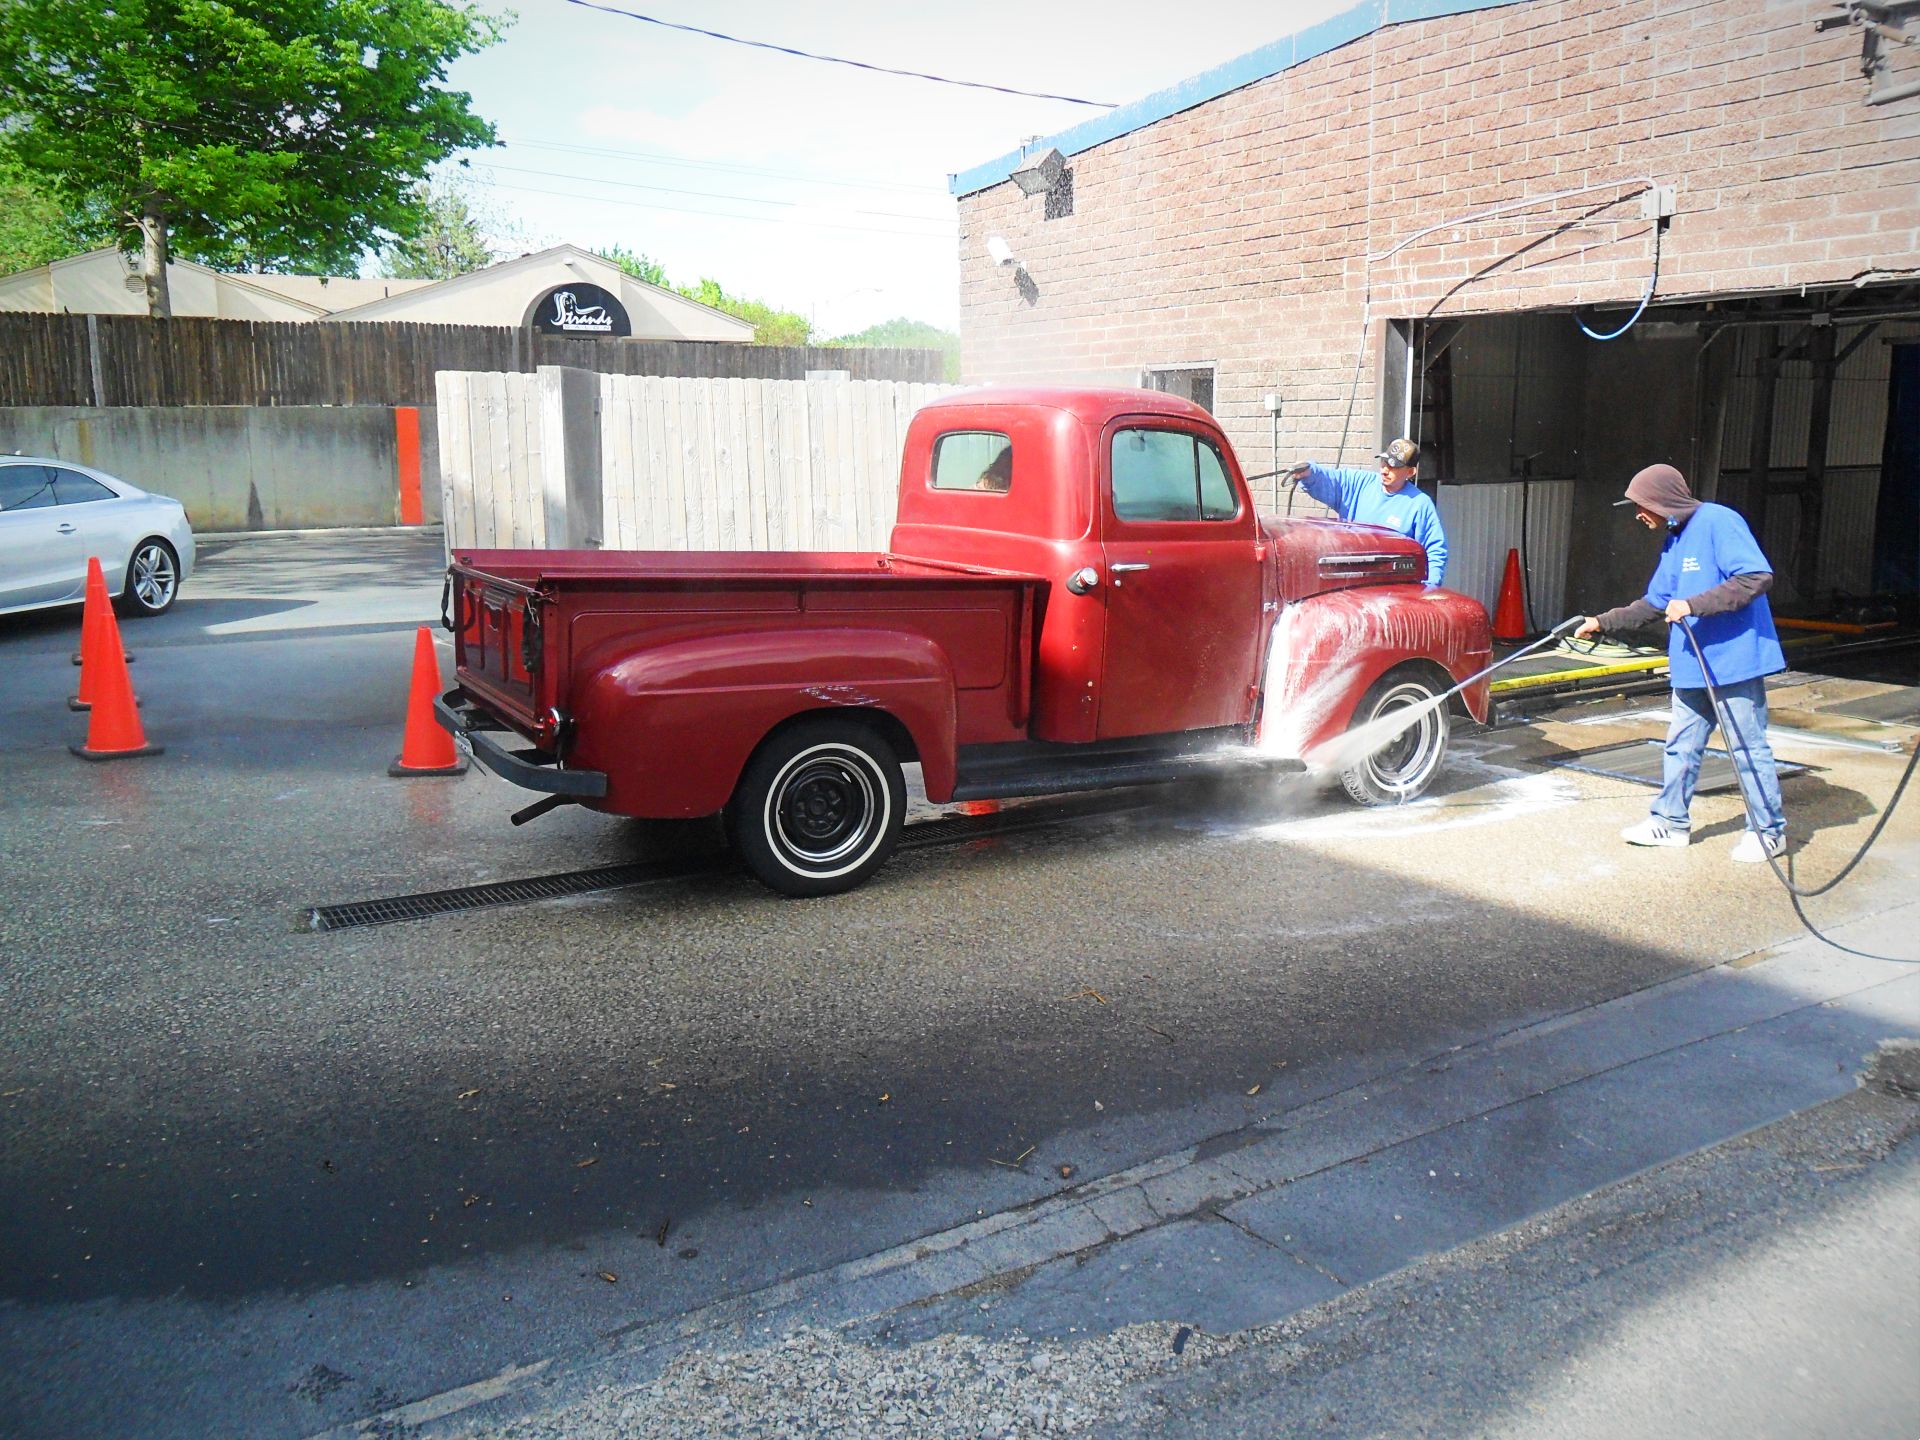 Rainbow Car Wash Step 1 of Wash of a Red Classic Truck in Kansas City